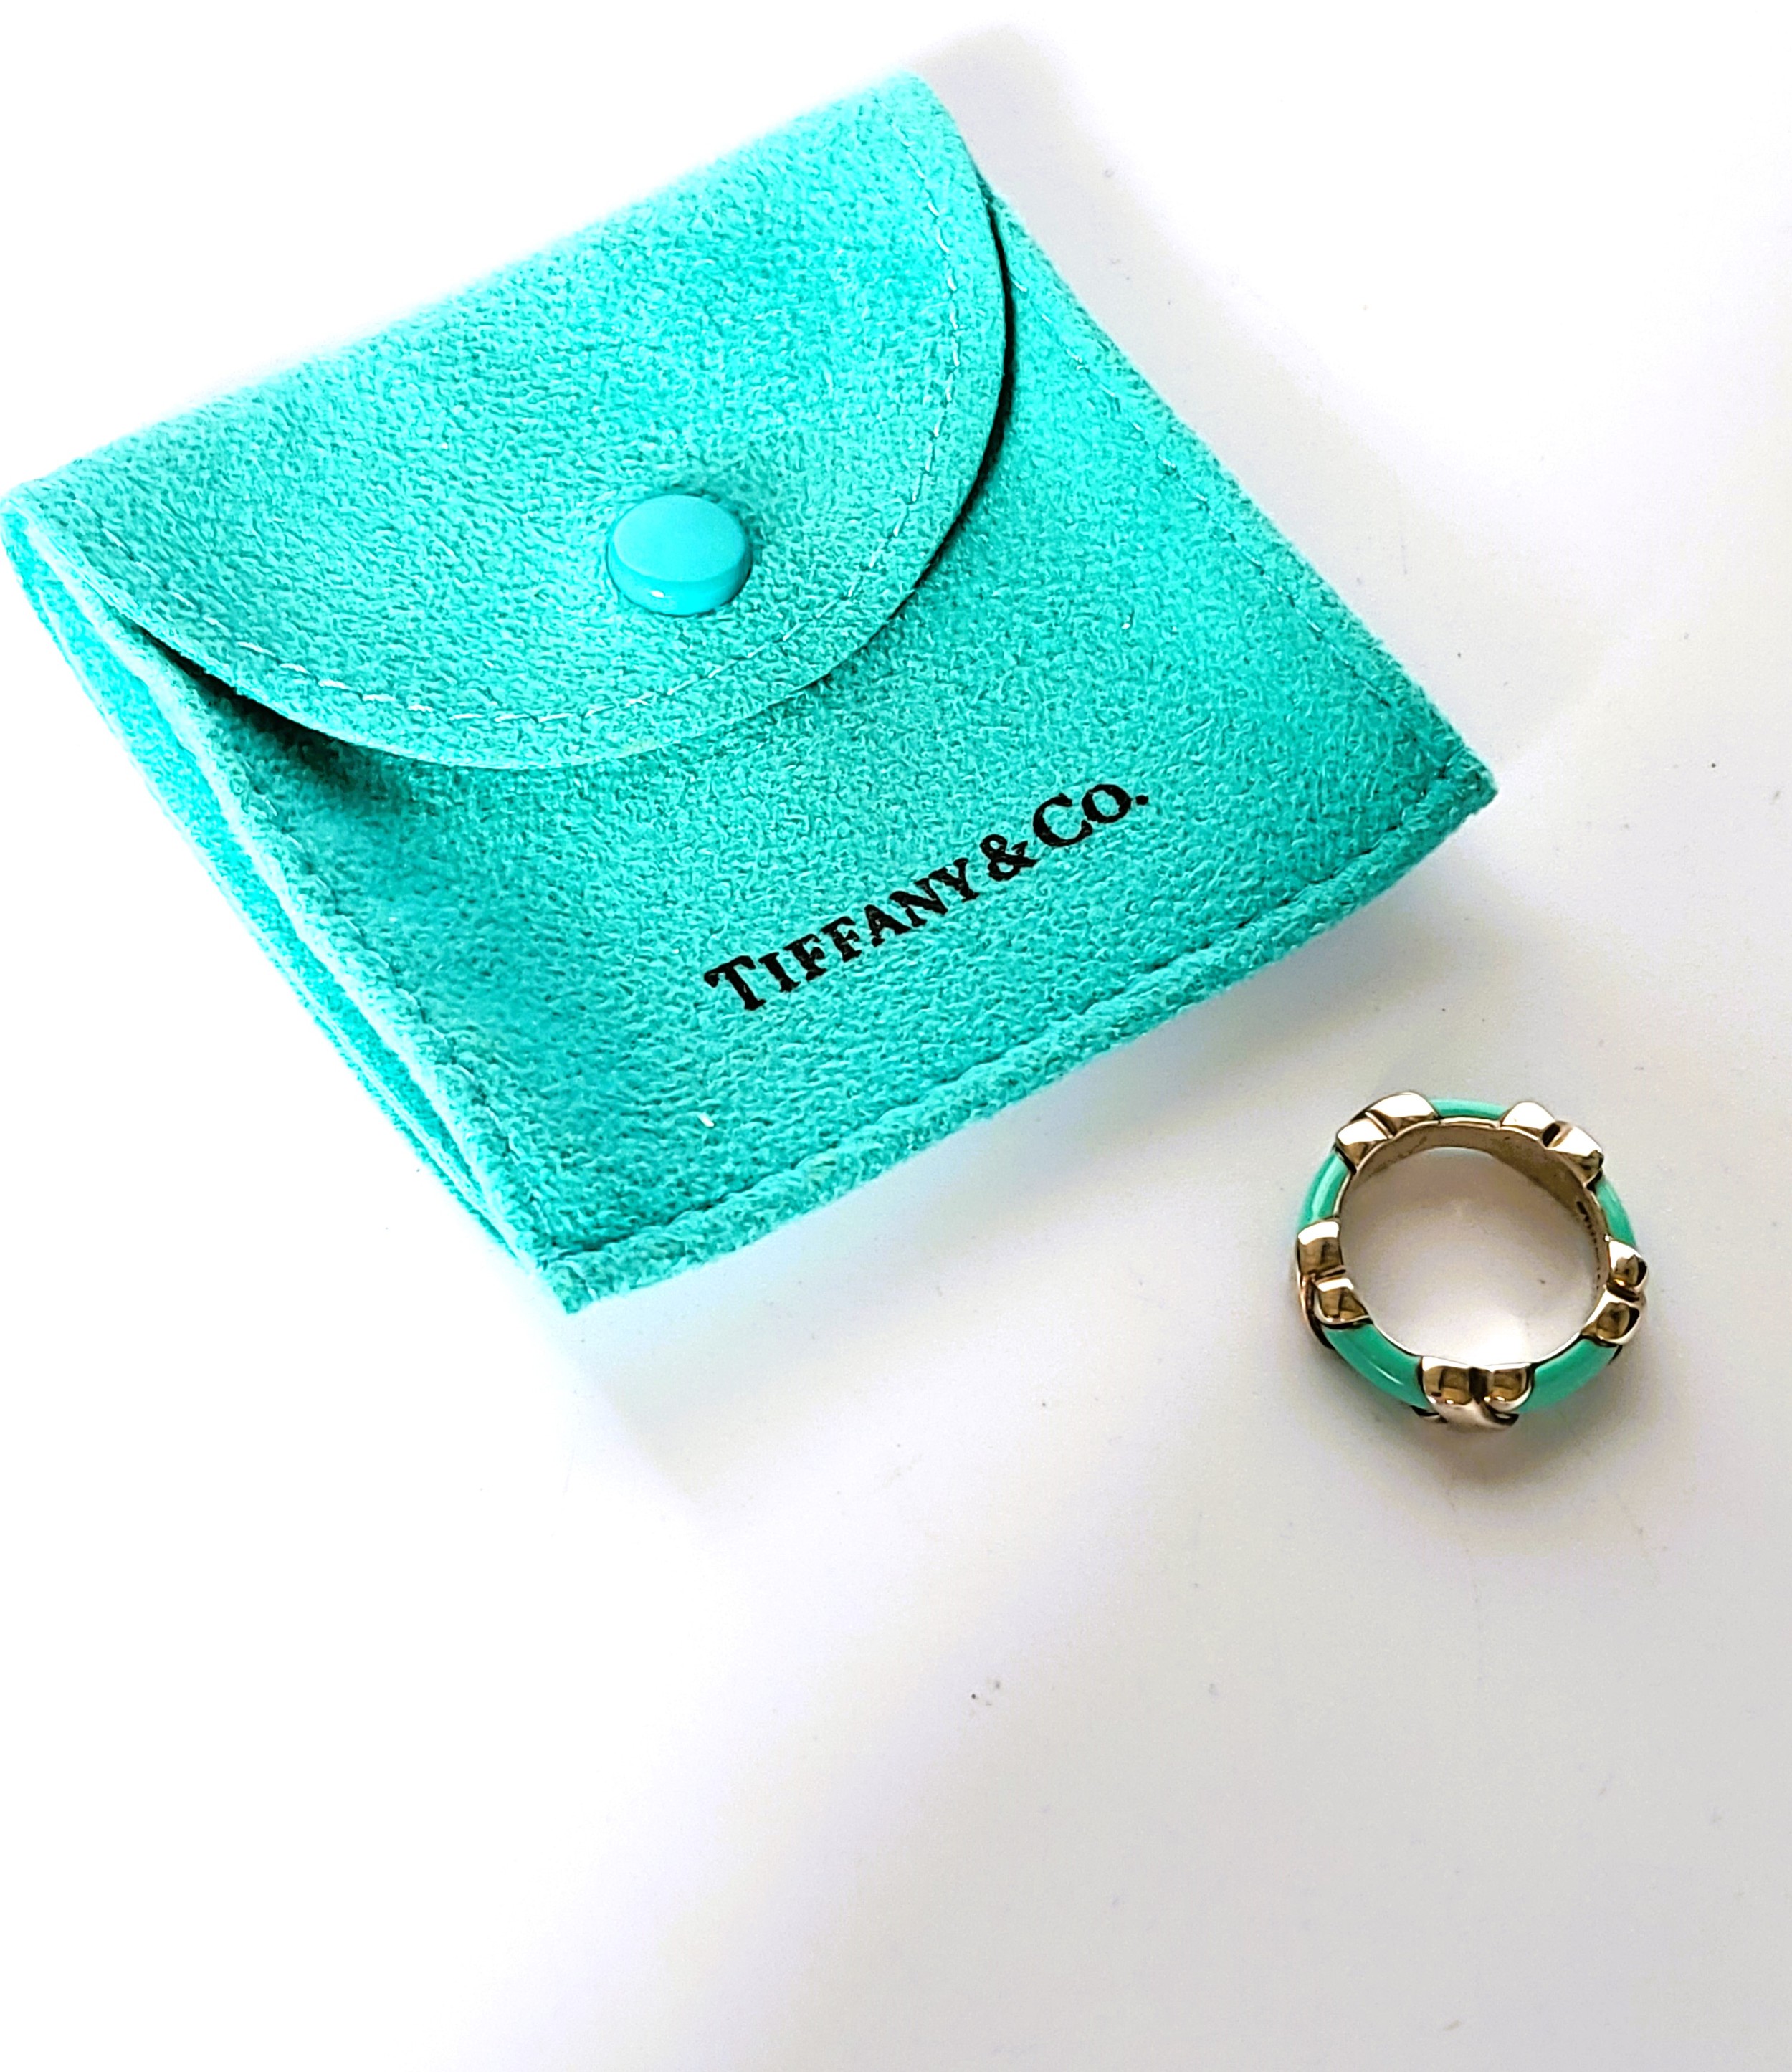 Tiffany silver and turquoise enamel ring with pouch